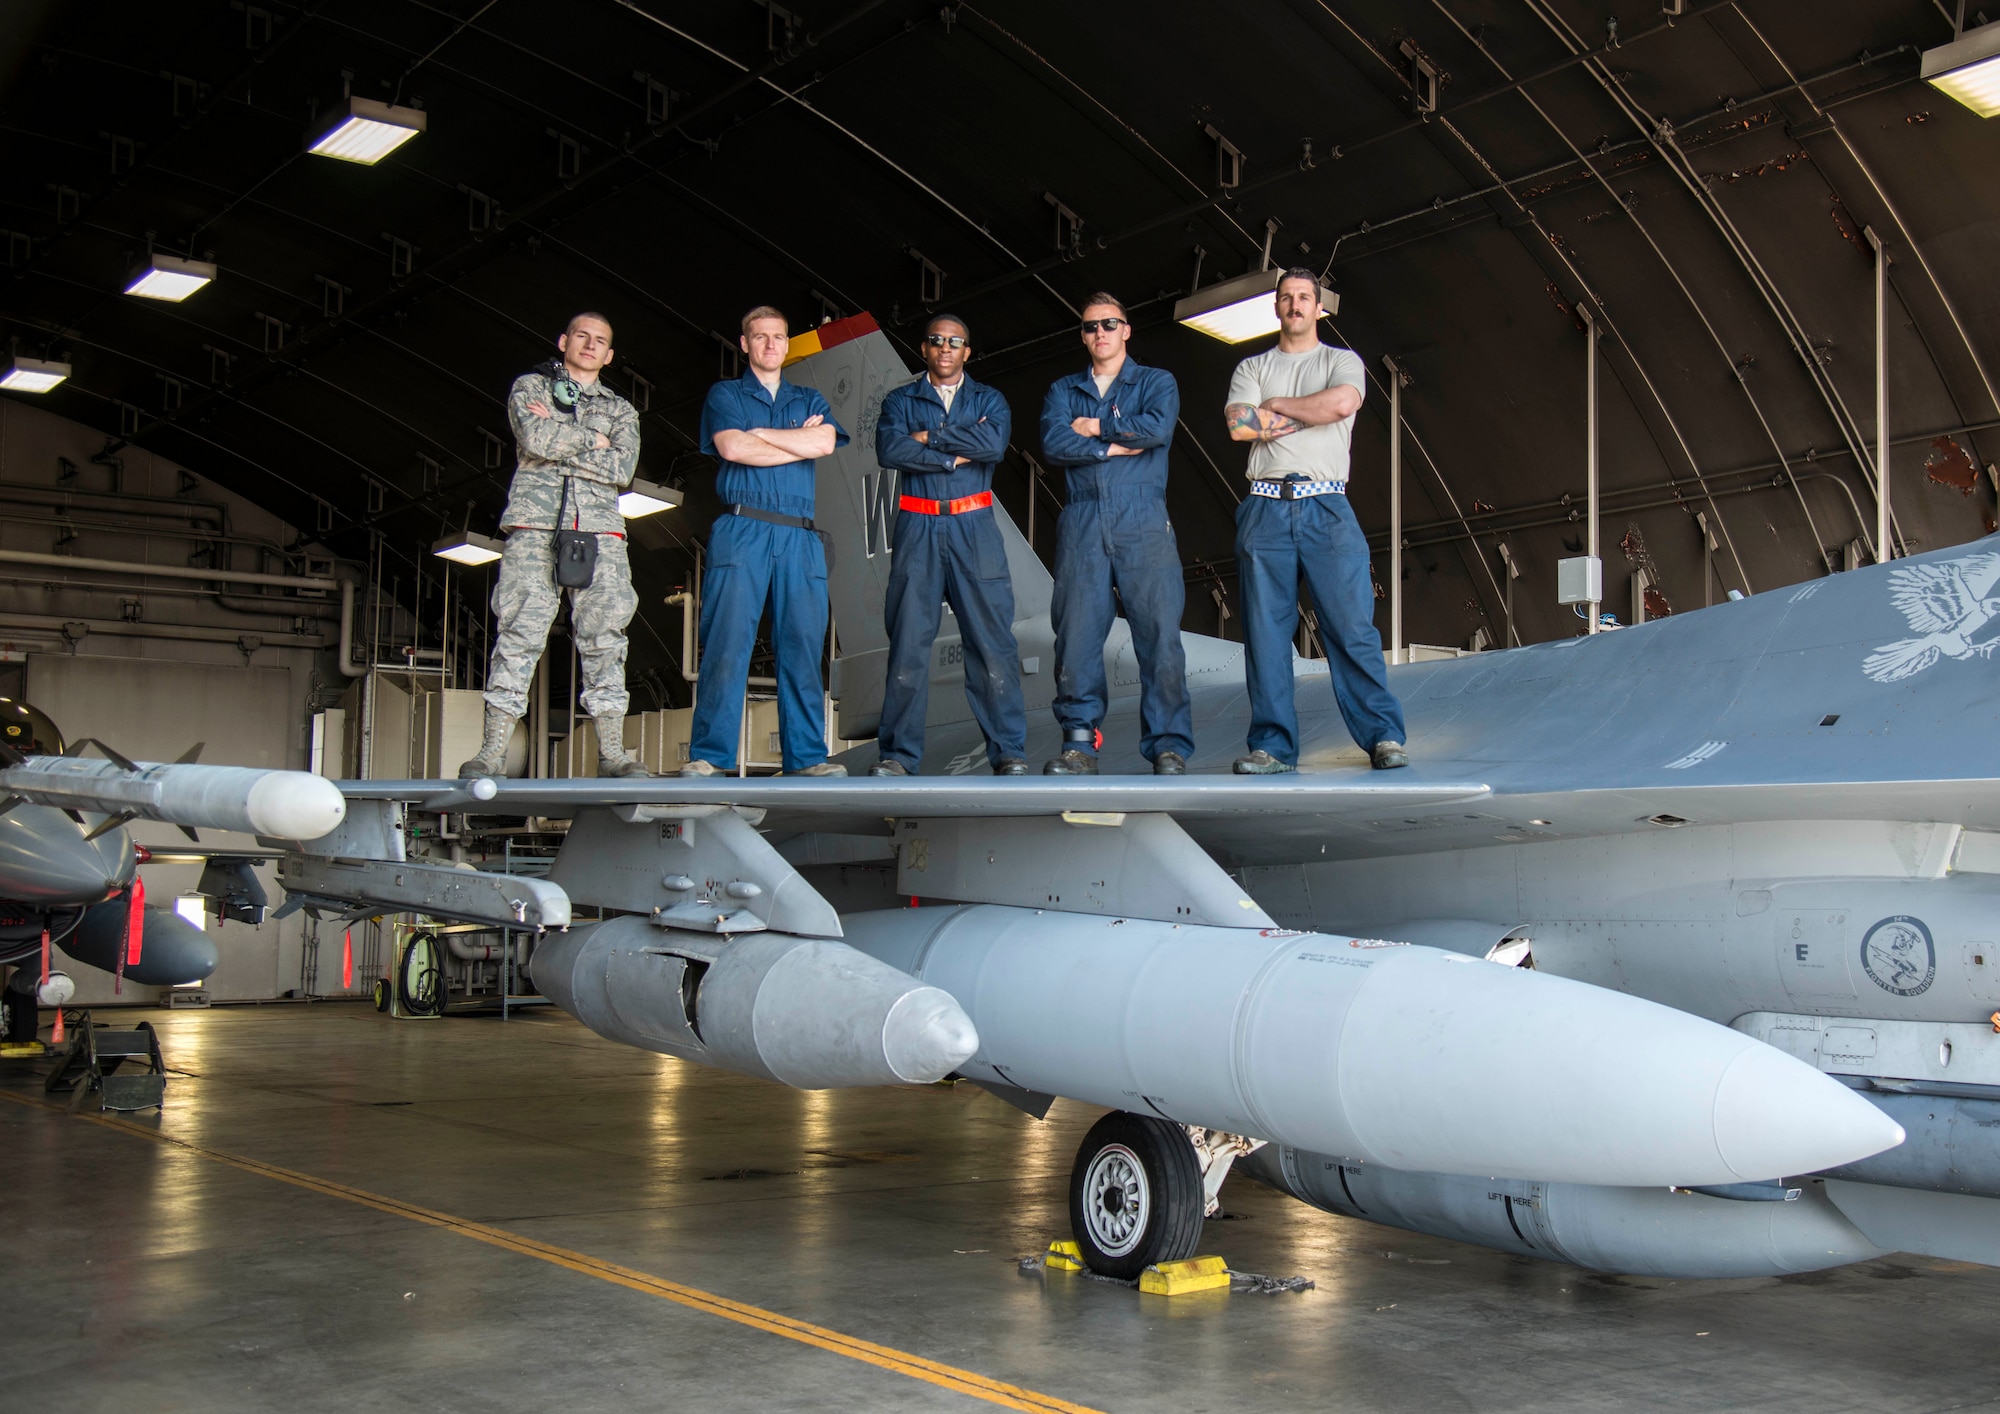 Airmen with the 13th Aircraft Maintenance Squadron pose for a photo on top of an F-16 Fighting Falcon at Misawa Air Base, Japan, April 20, 2017. The 13th AMXS worked tirelessly to ensure all the 13th Fighter Squadron's jets are 100 percent mission capable. (U.S. Air Force photo by Senior Airman Brittany A. Chase)